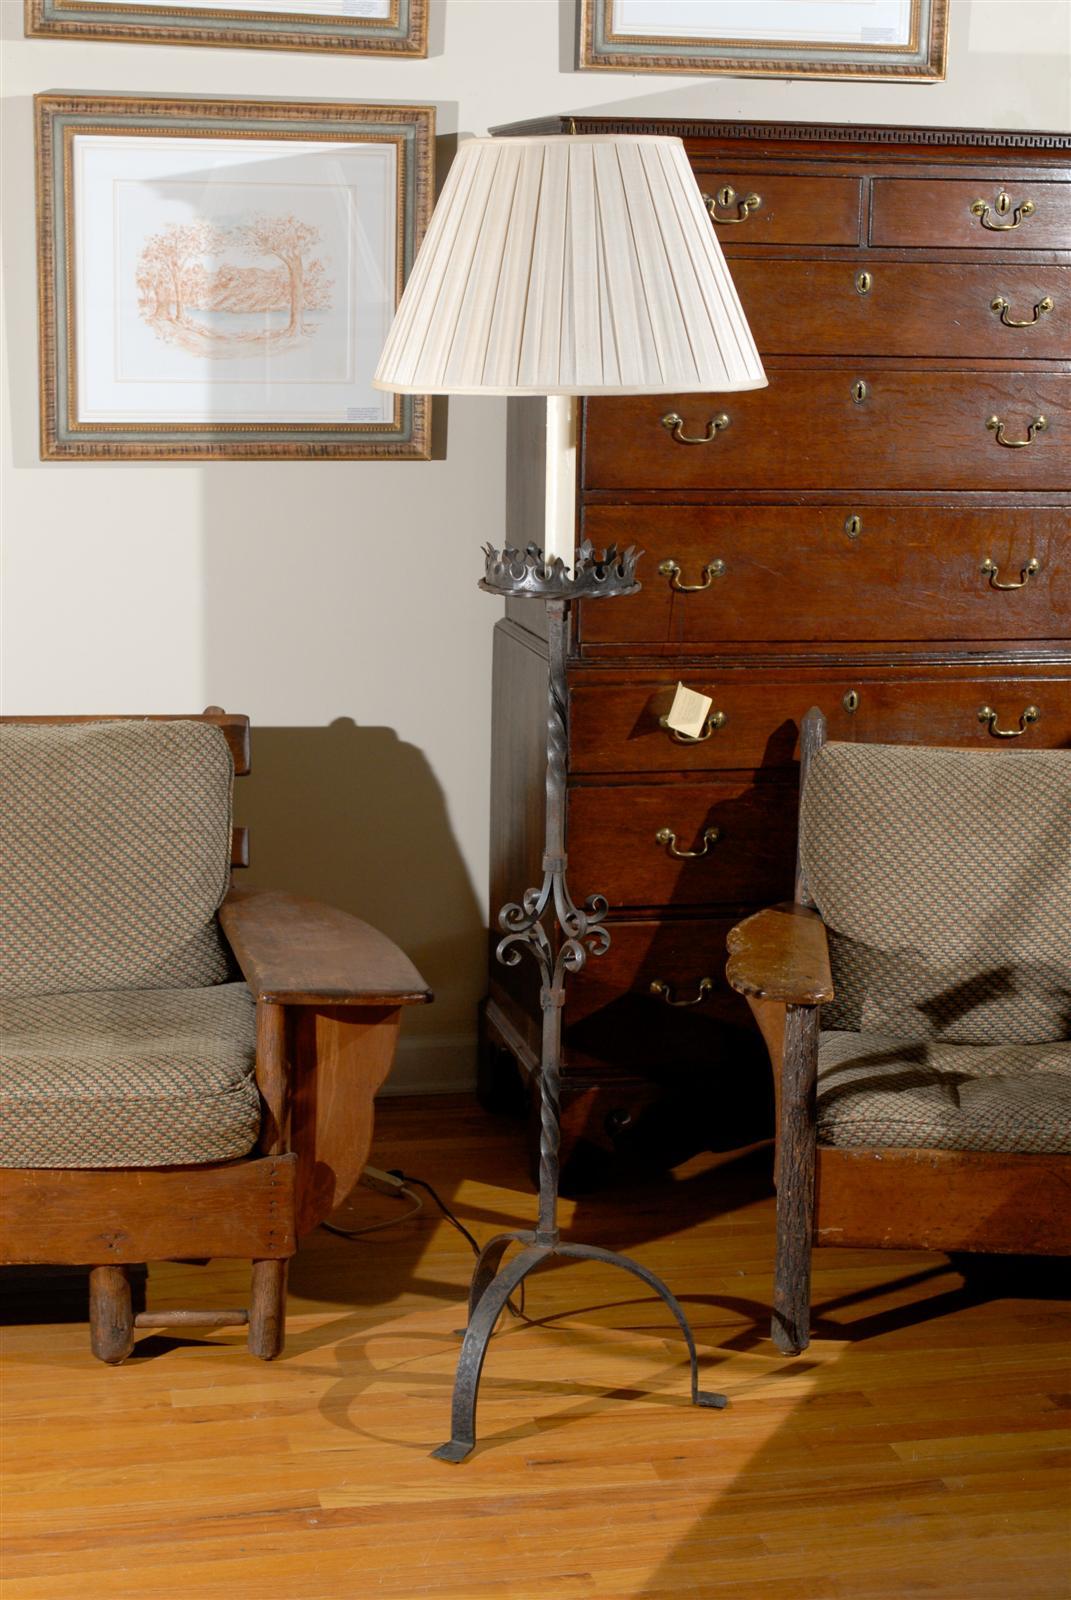 This is a wonderful floor lamp that would grace any home. It could fit into any style of home from casual. It has been professionally wired.